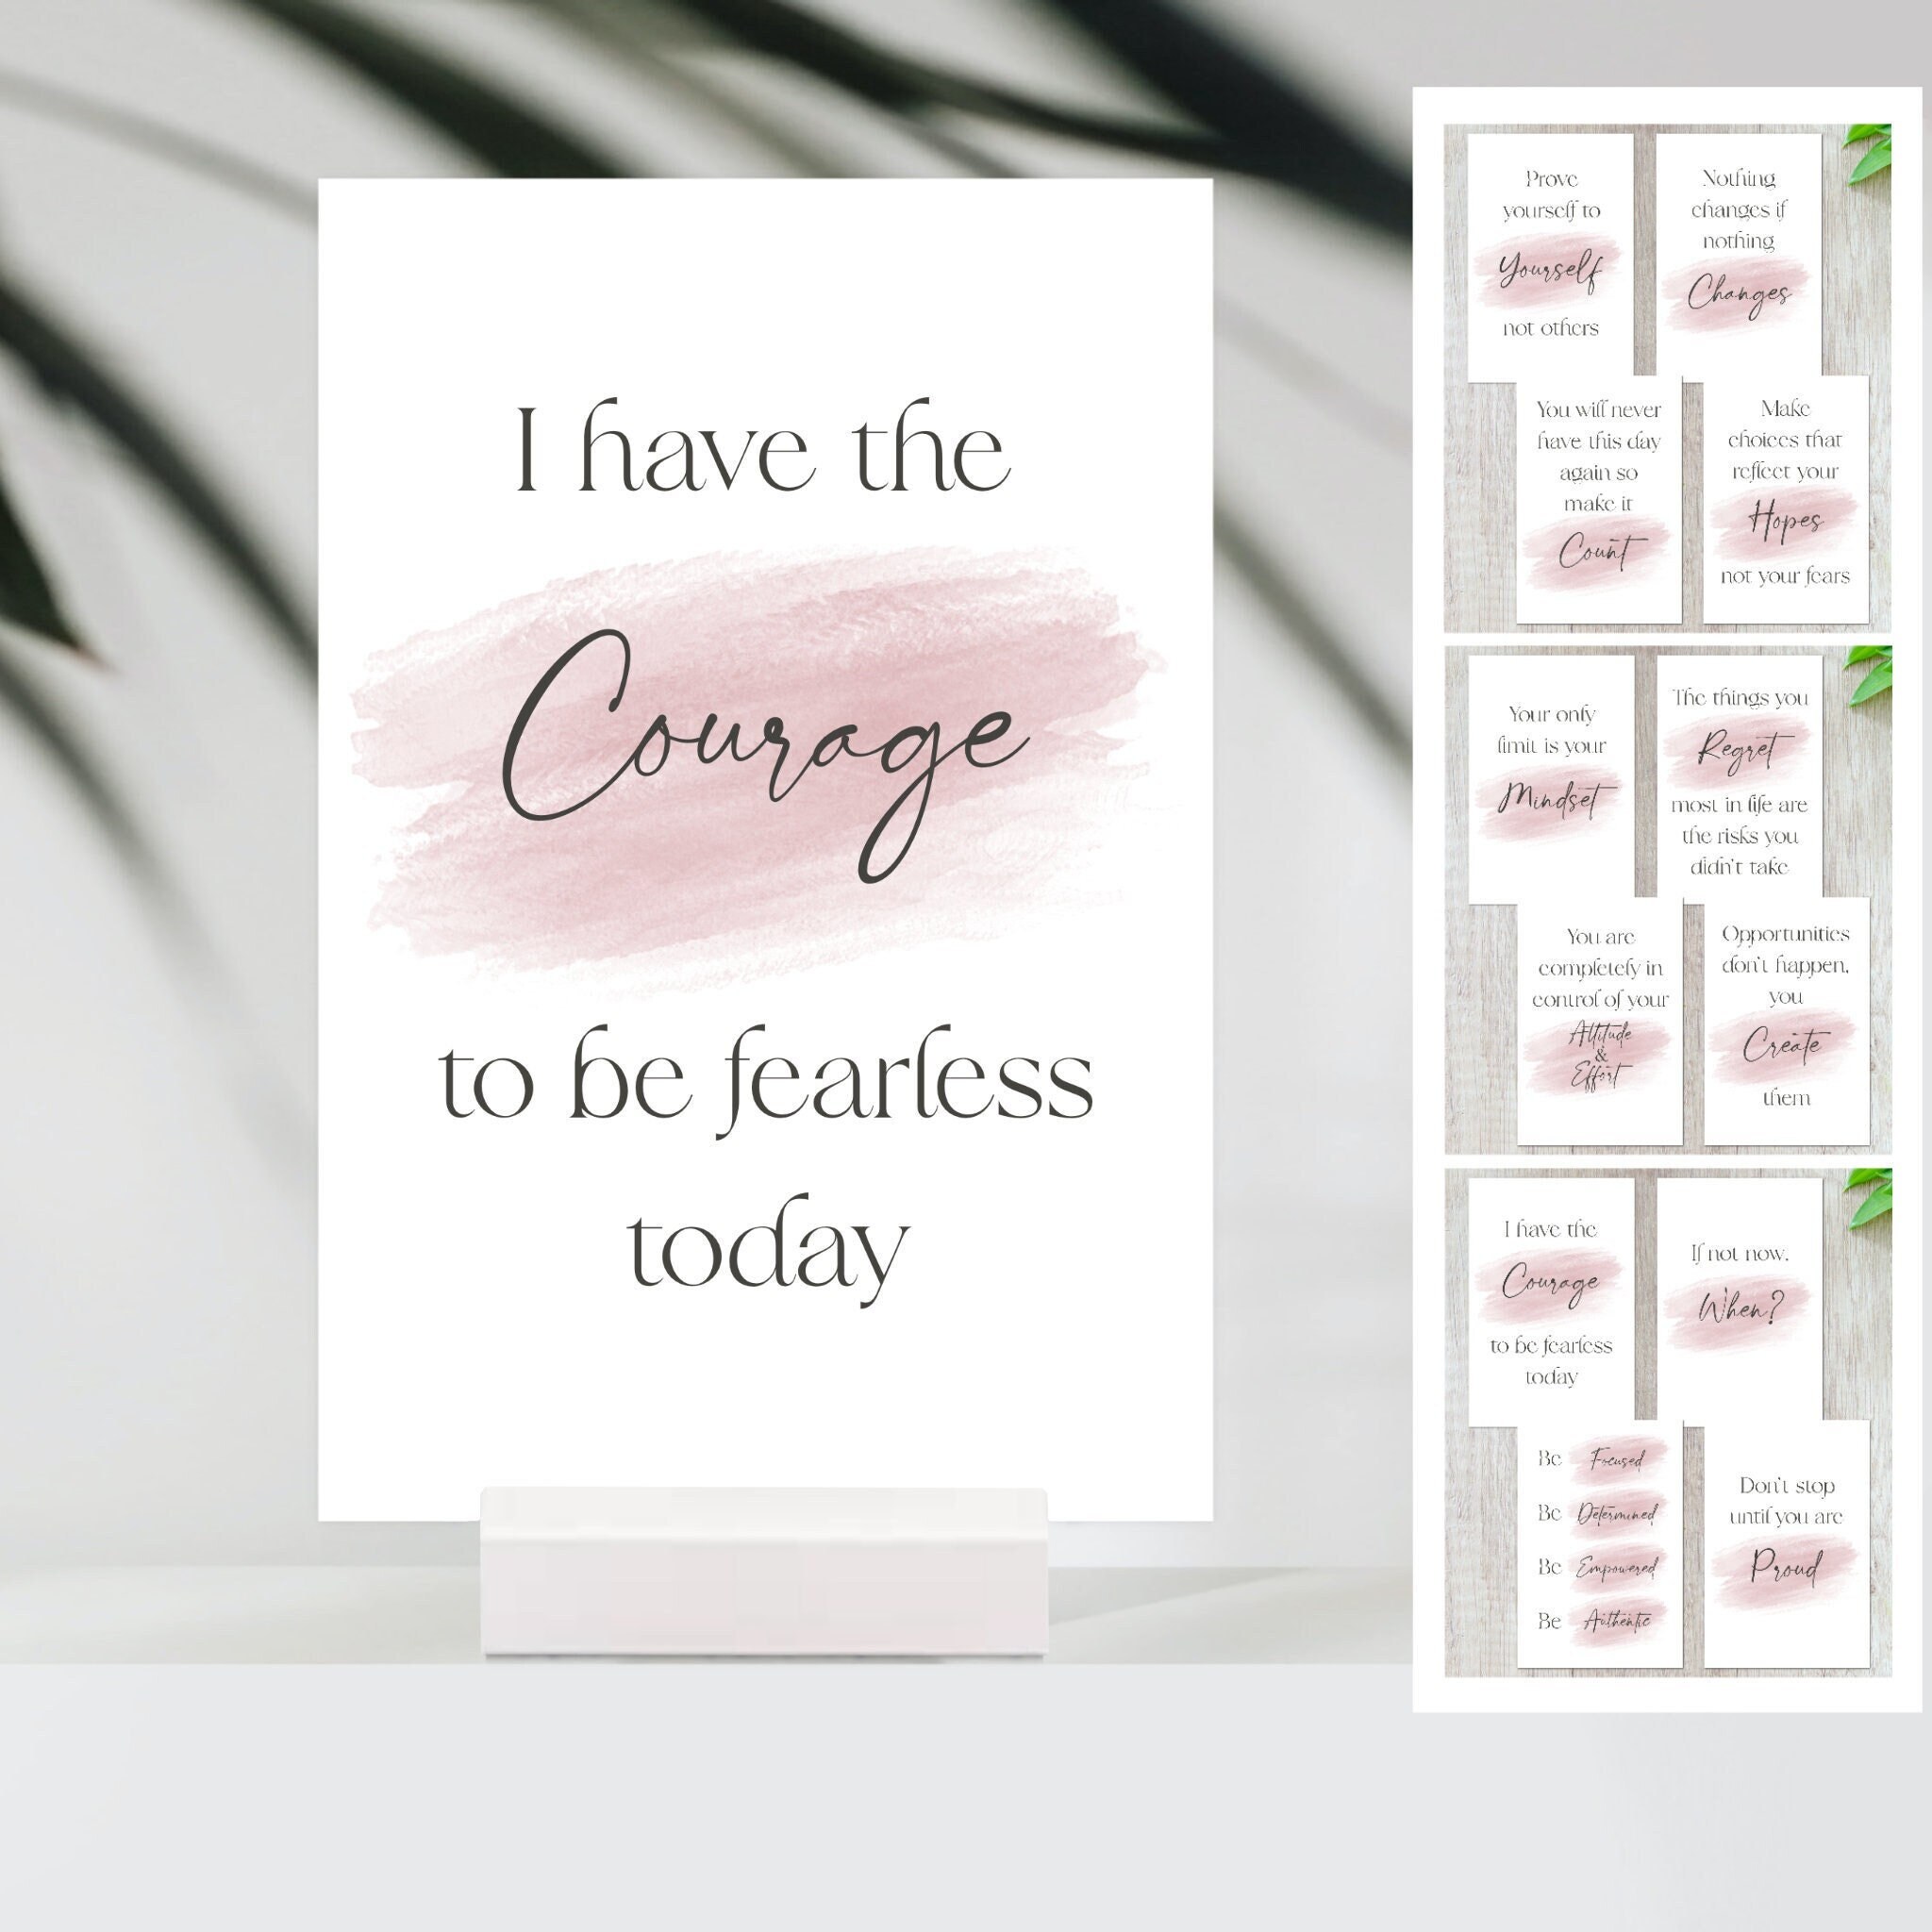 INSPIRATIONAL WORDS Mini Note Cards - Set of 12 - Handmade with Envelope